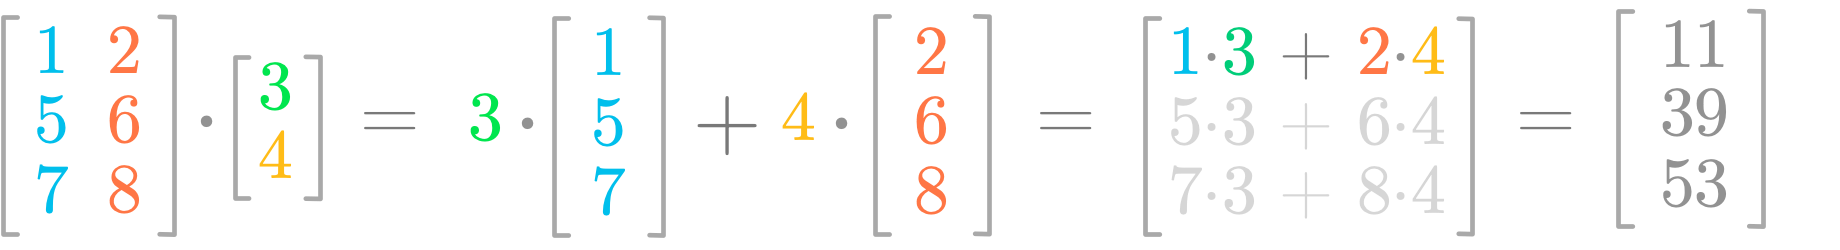 Figure 3: The vectors values are weighting the columns of the matrix.